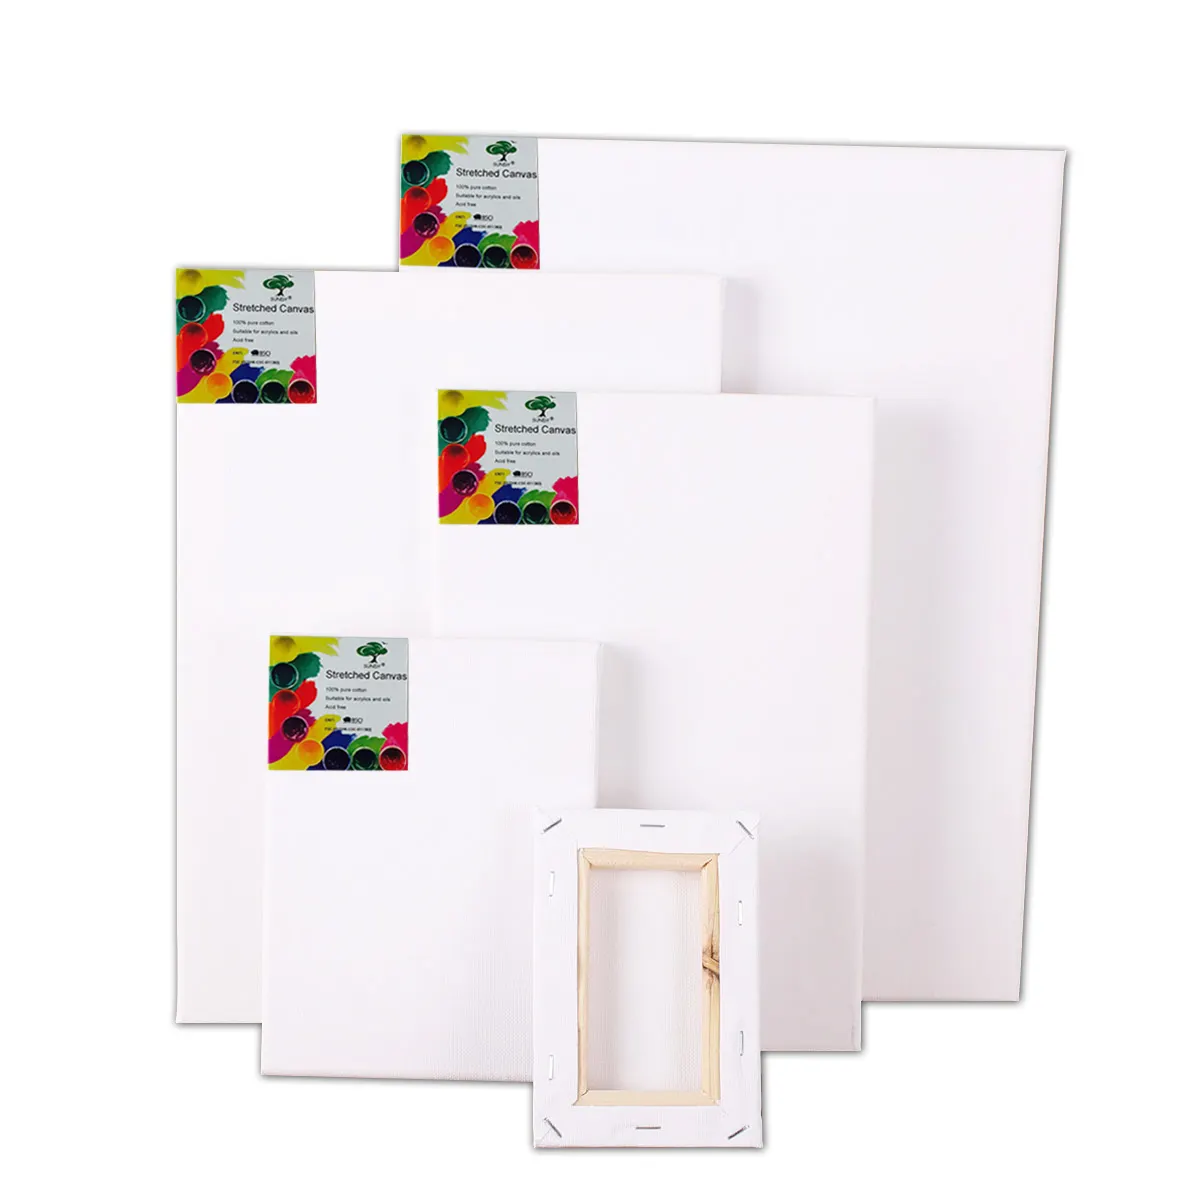 8*10 10 PCS / SET Blank Canvas 280G Canvas Cheap Stretched Canvas for Painting